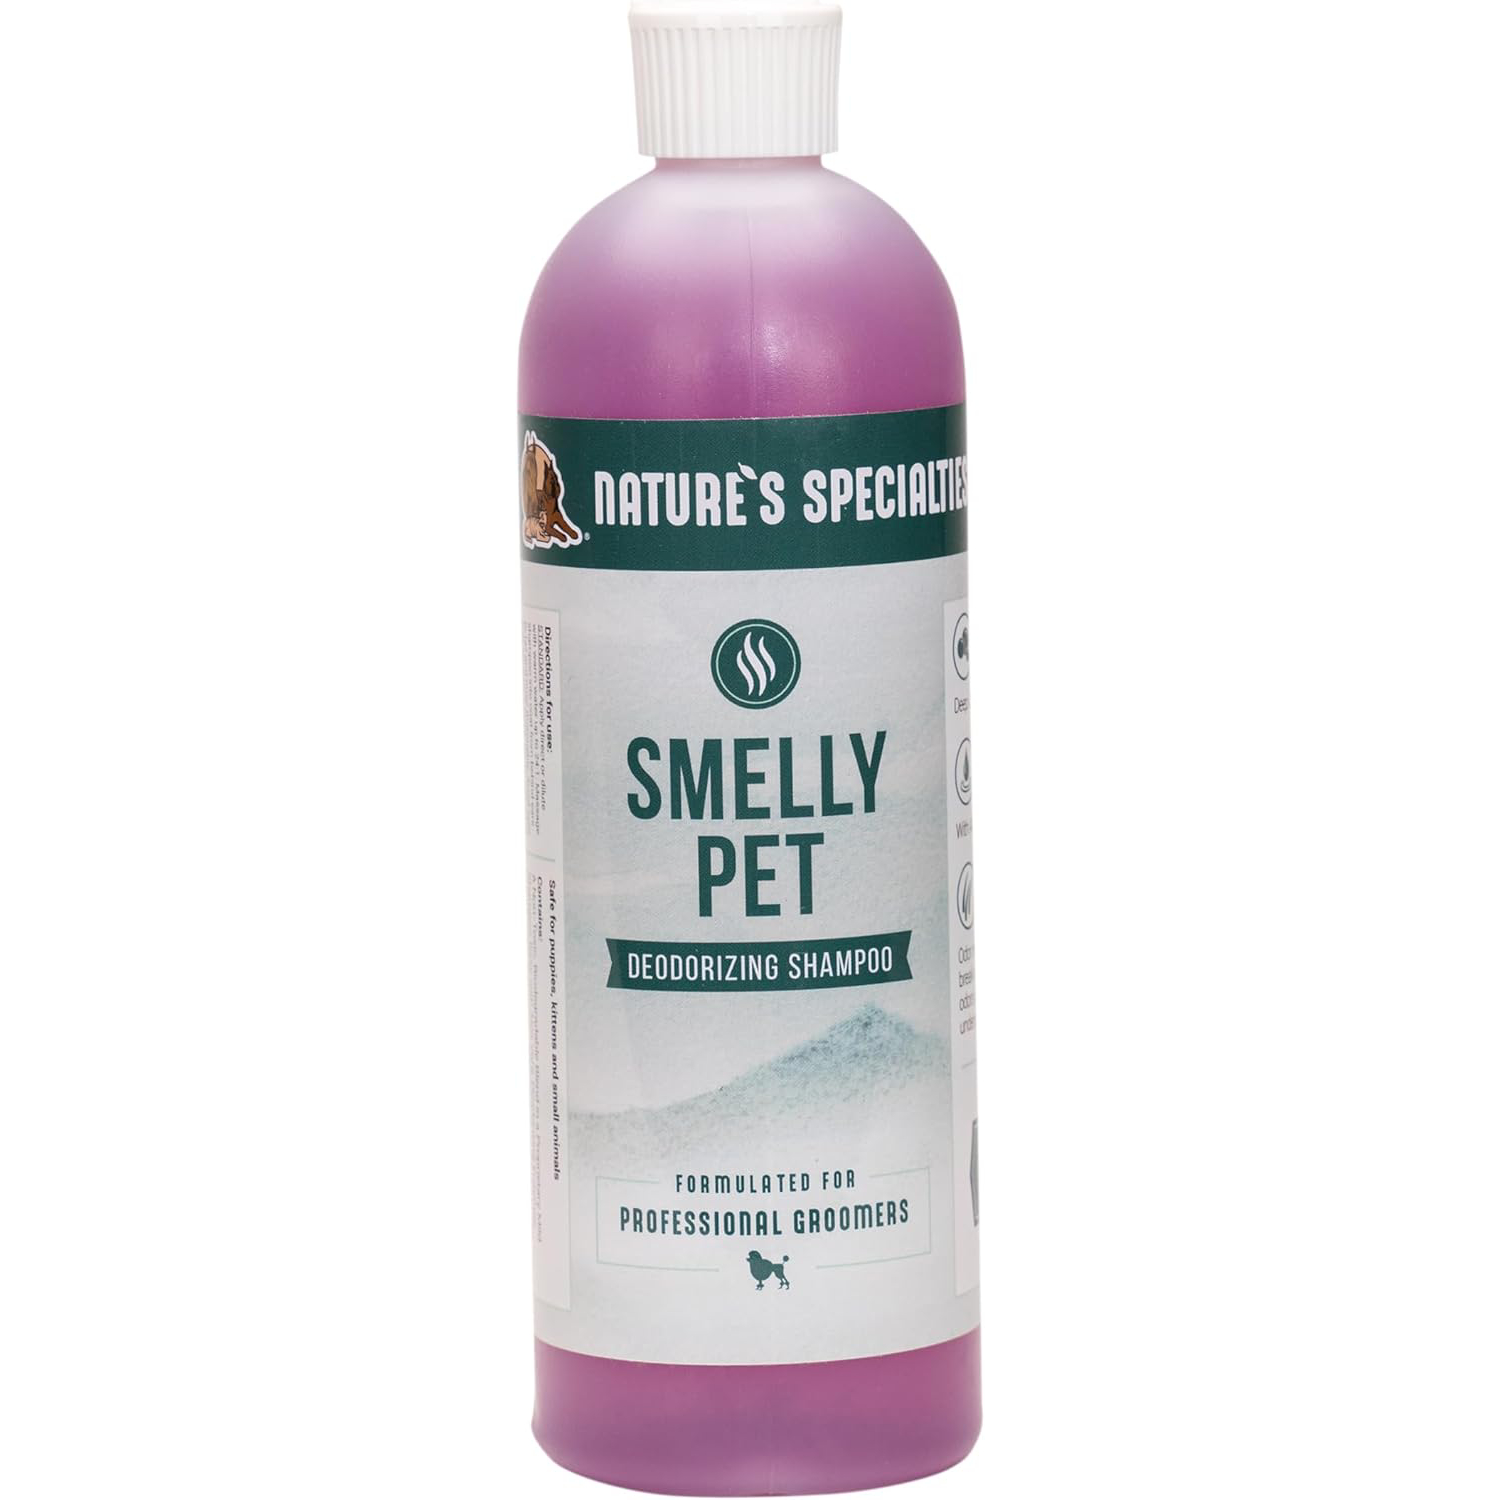 Nature's Specialties Smelly Pet Dog Shampoo for Pets